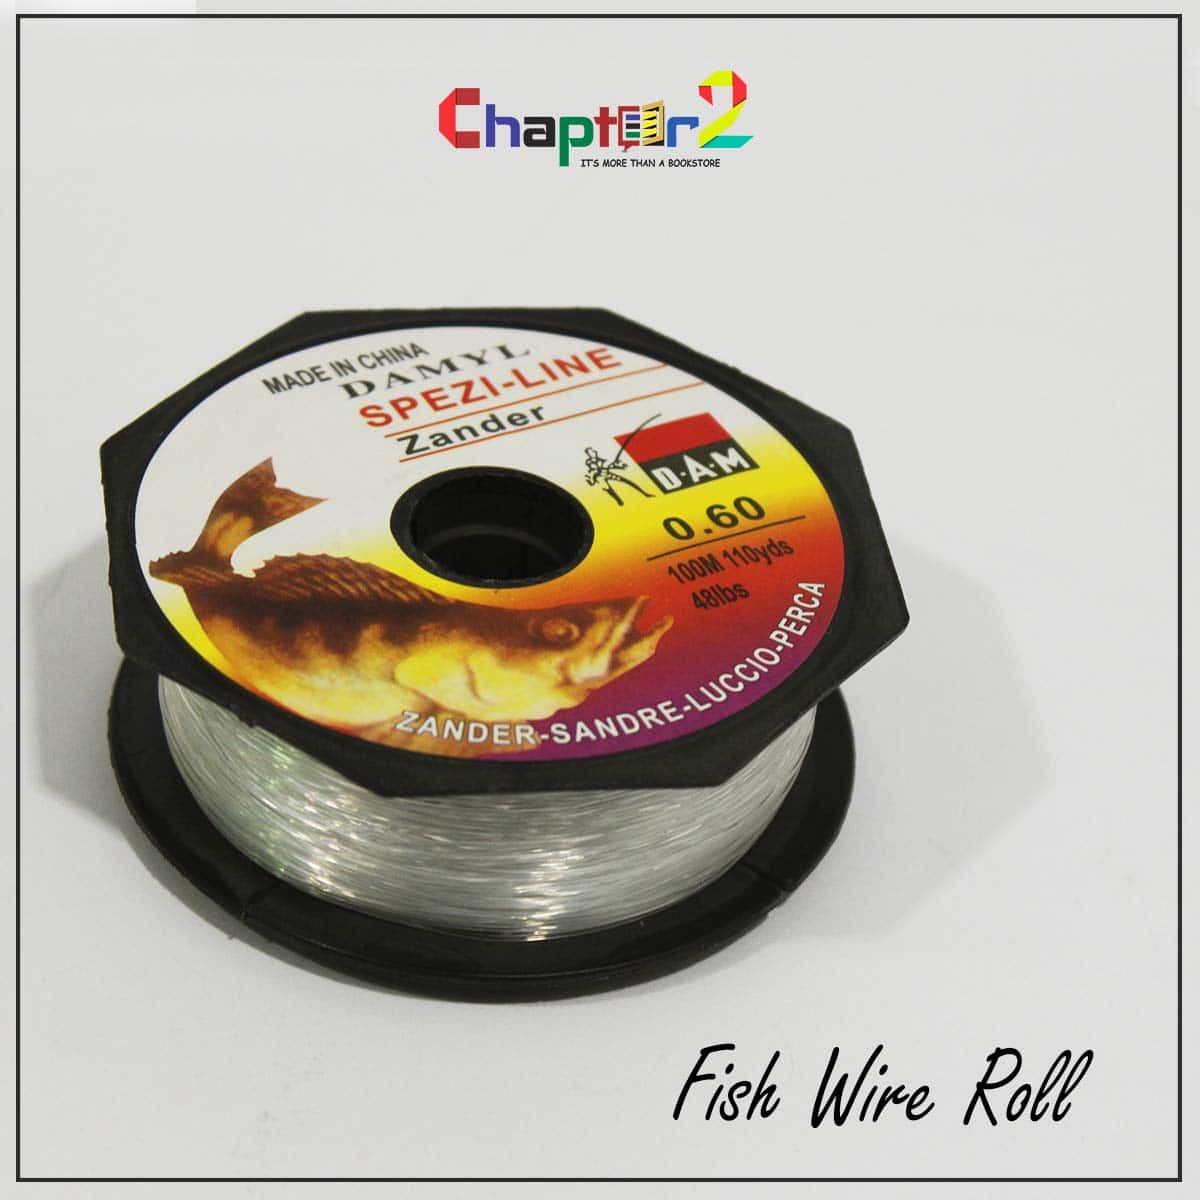 https://chapter2.pk/wp-content/uploads/2020/11/Fish-Wire-Roll.jpg